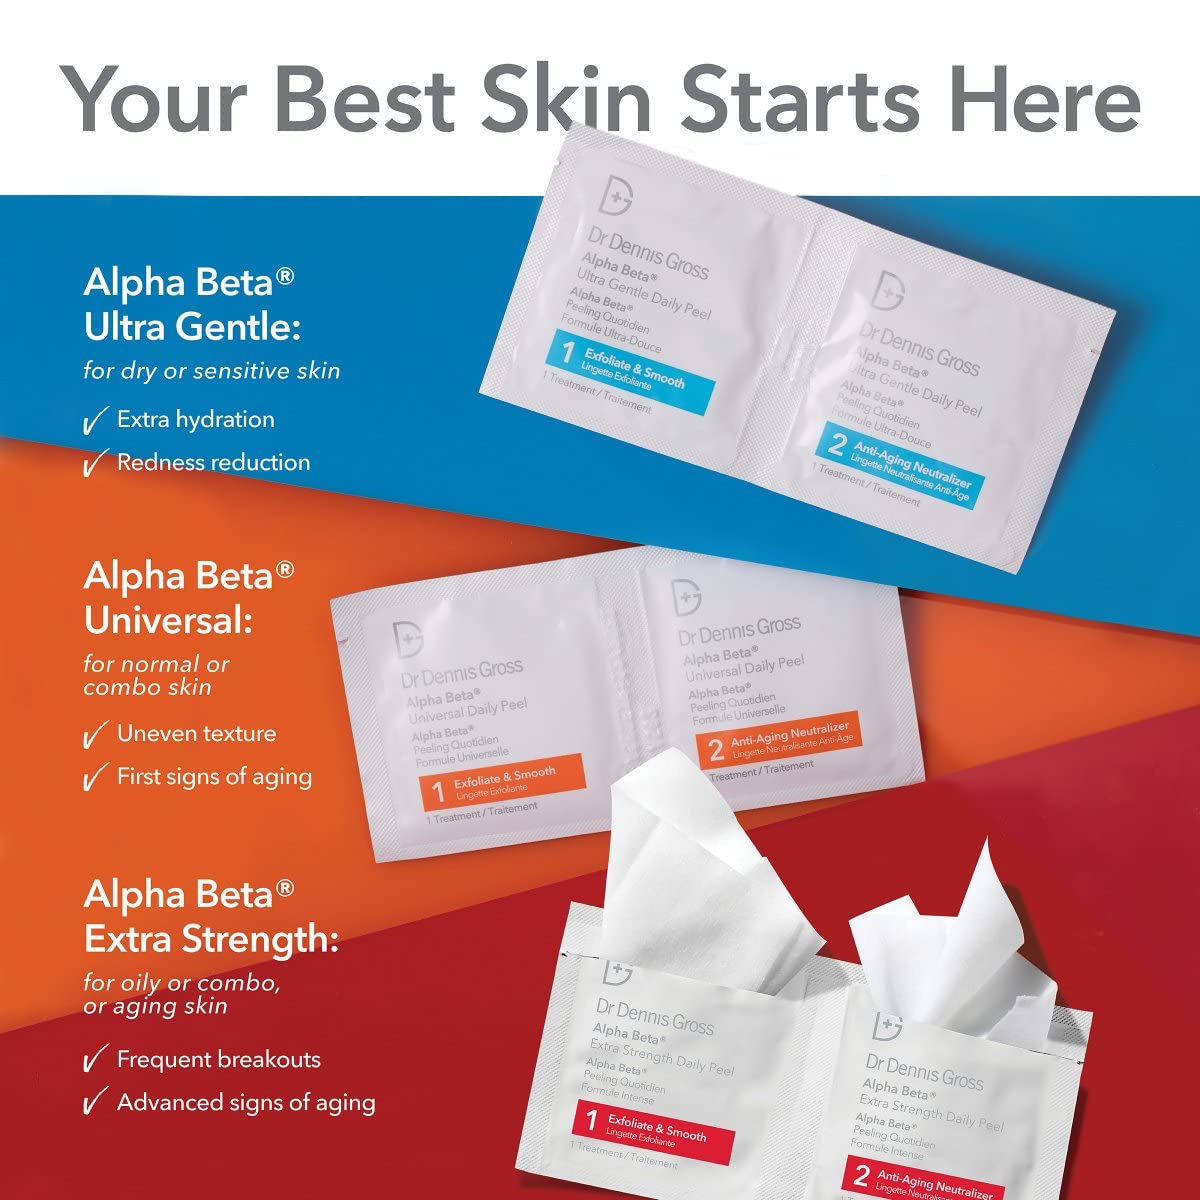 Dr. Dennis Gross Alpha Beta Extra Strength Daily Peel | 2 Step Daily Treatment to Boost Radiance, Refine Pores, Clear Breakouts, and Smooth Lines & Wrinkles | 5 Treatments